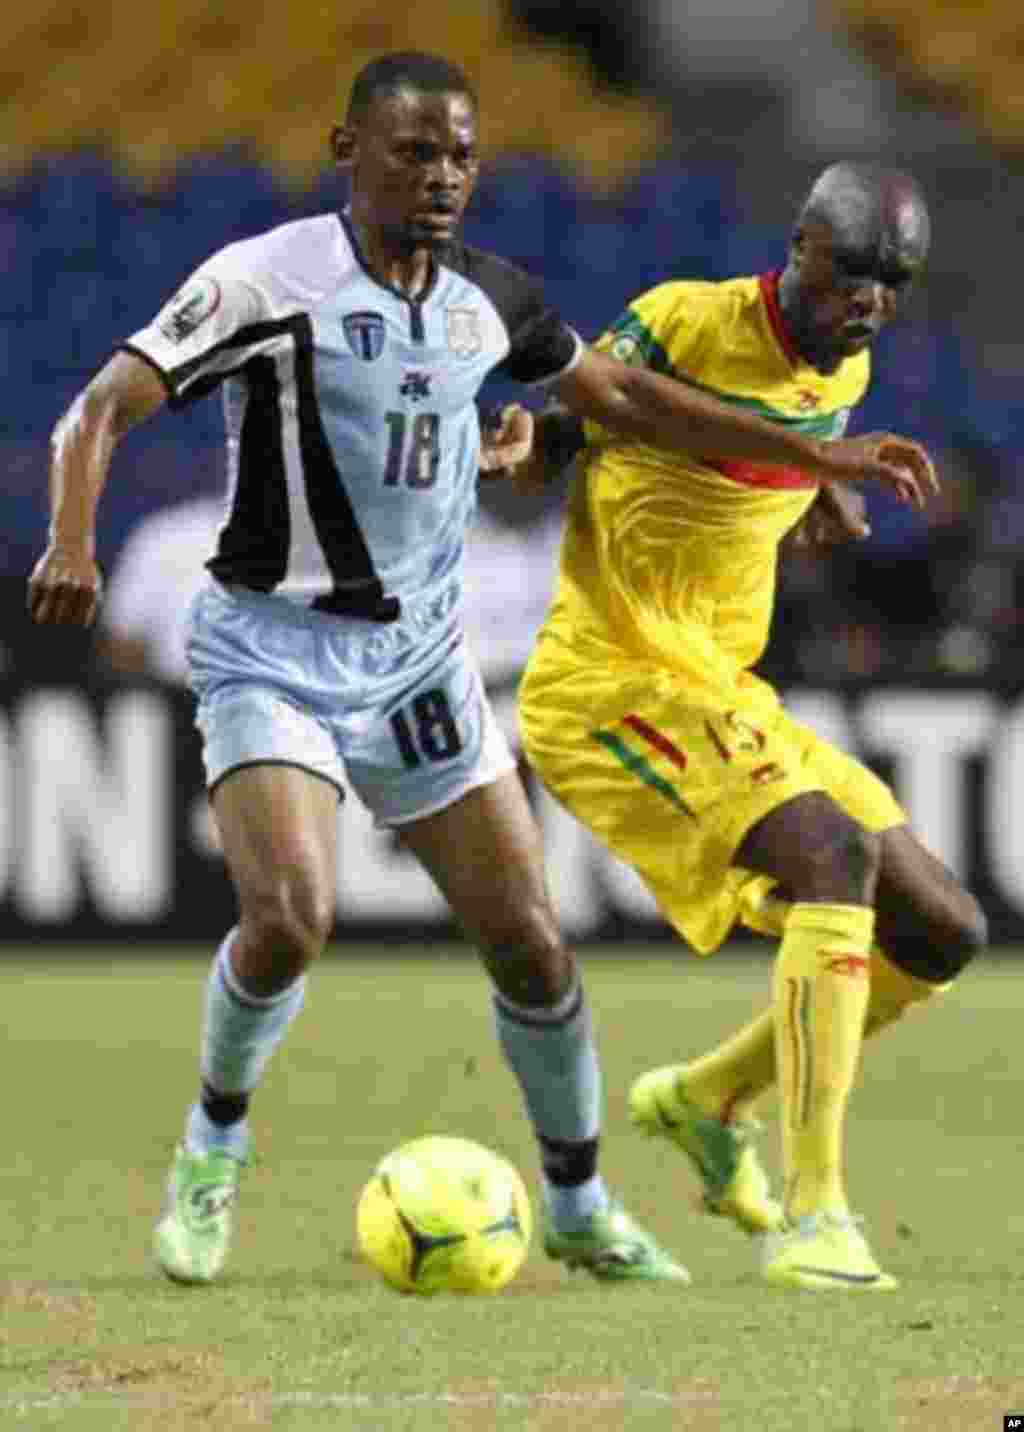 Botswana's Mogogi Gabonamong (18) plays against Mali's Bakaye Traore (15) during their final African Cup of Nations Group D soccer match at the Stade De L'Amitie Stadium in Libreville February 1, 2012.